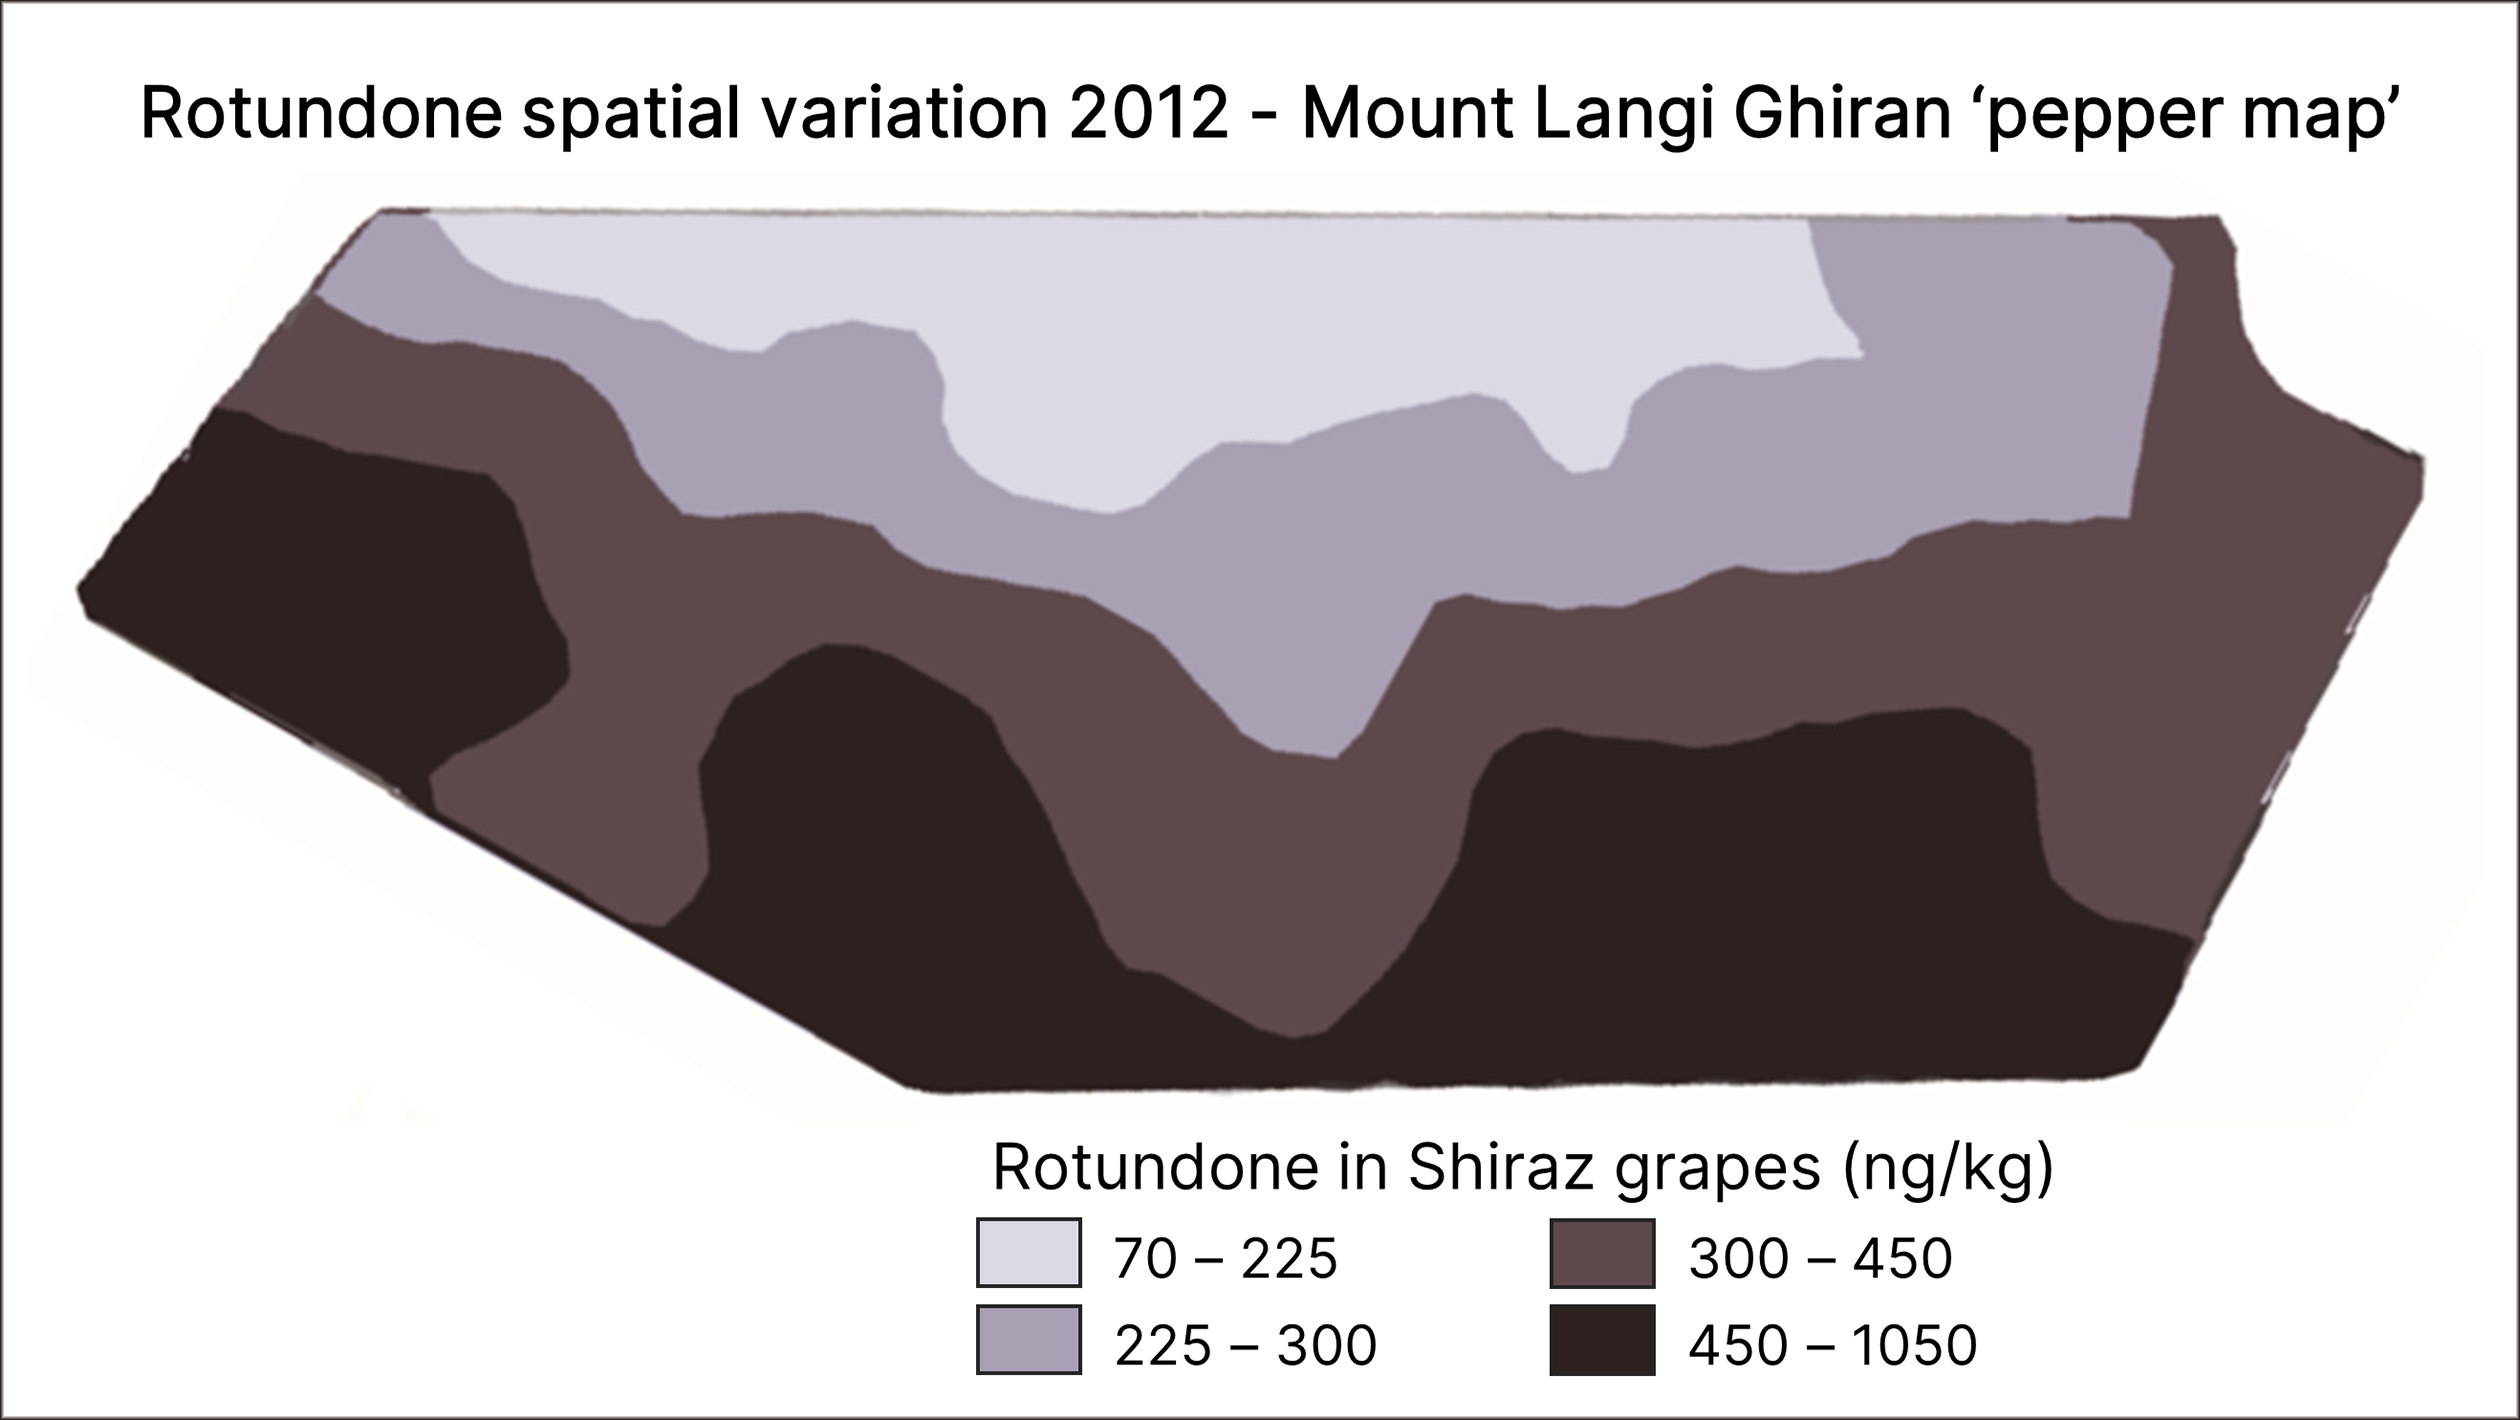 A gradient-like map illustrating different amounts of rotundone Mount Langi Ghiran's Shiraz grapes in relation to their location